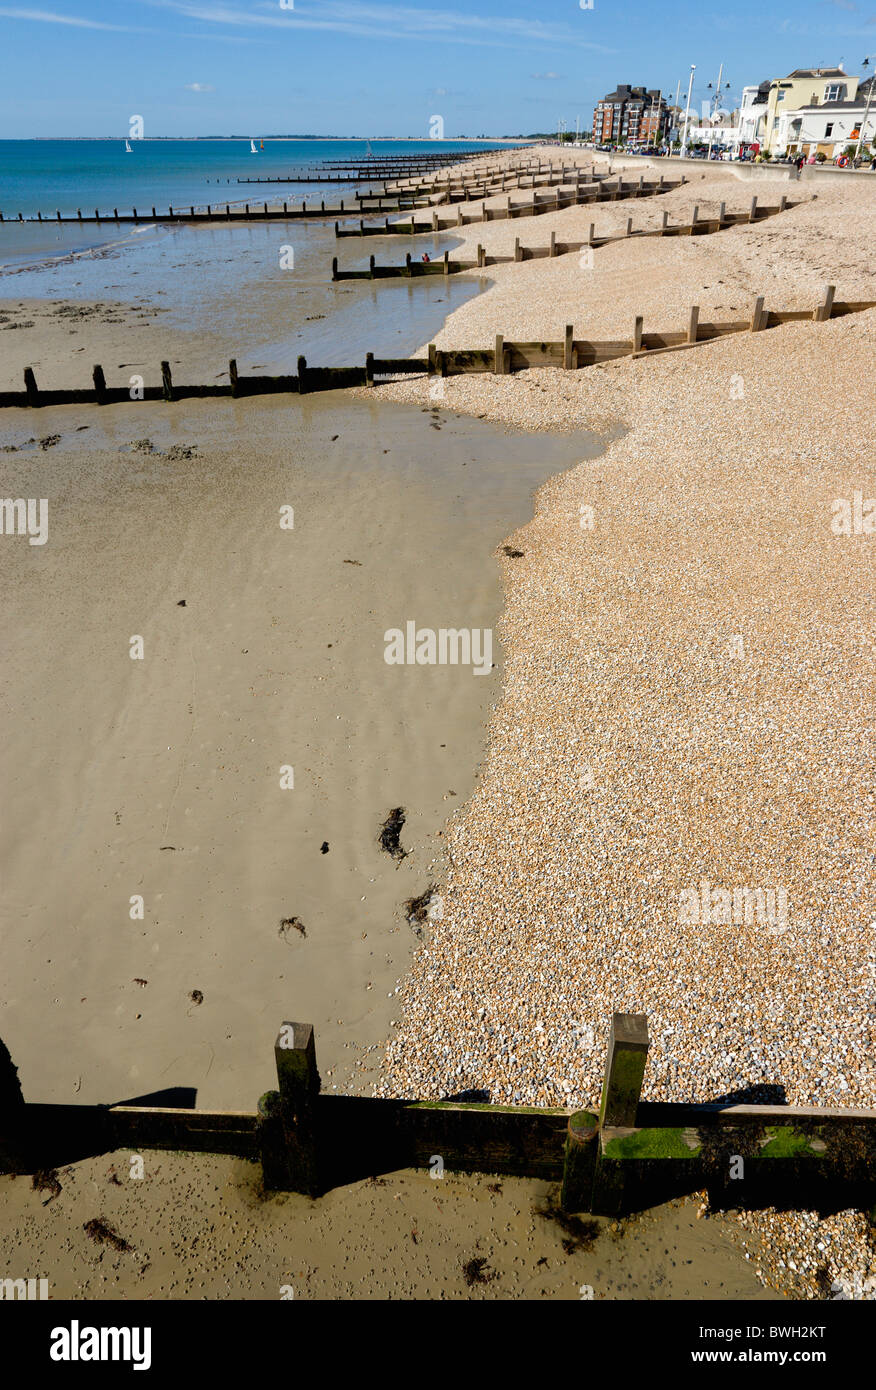 England, West Sussex, Bognor Regis, Wooden groynes at low tide used as sea defences against erosion of the shingle pebble beach. Stock Photo